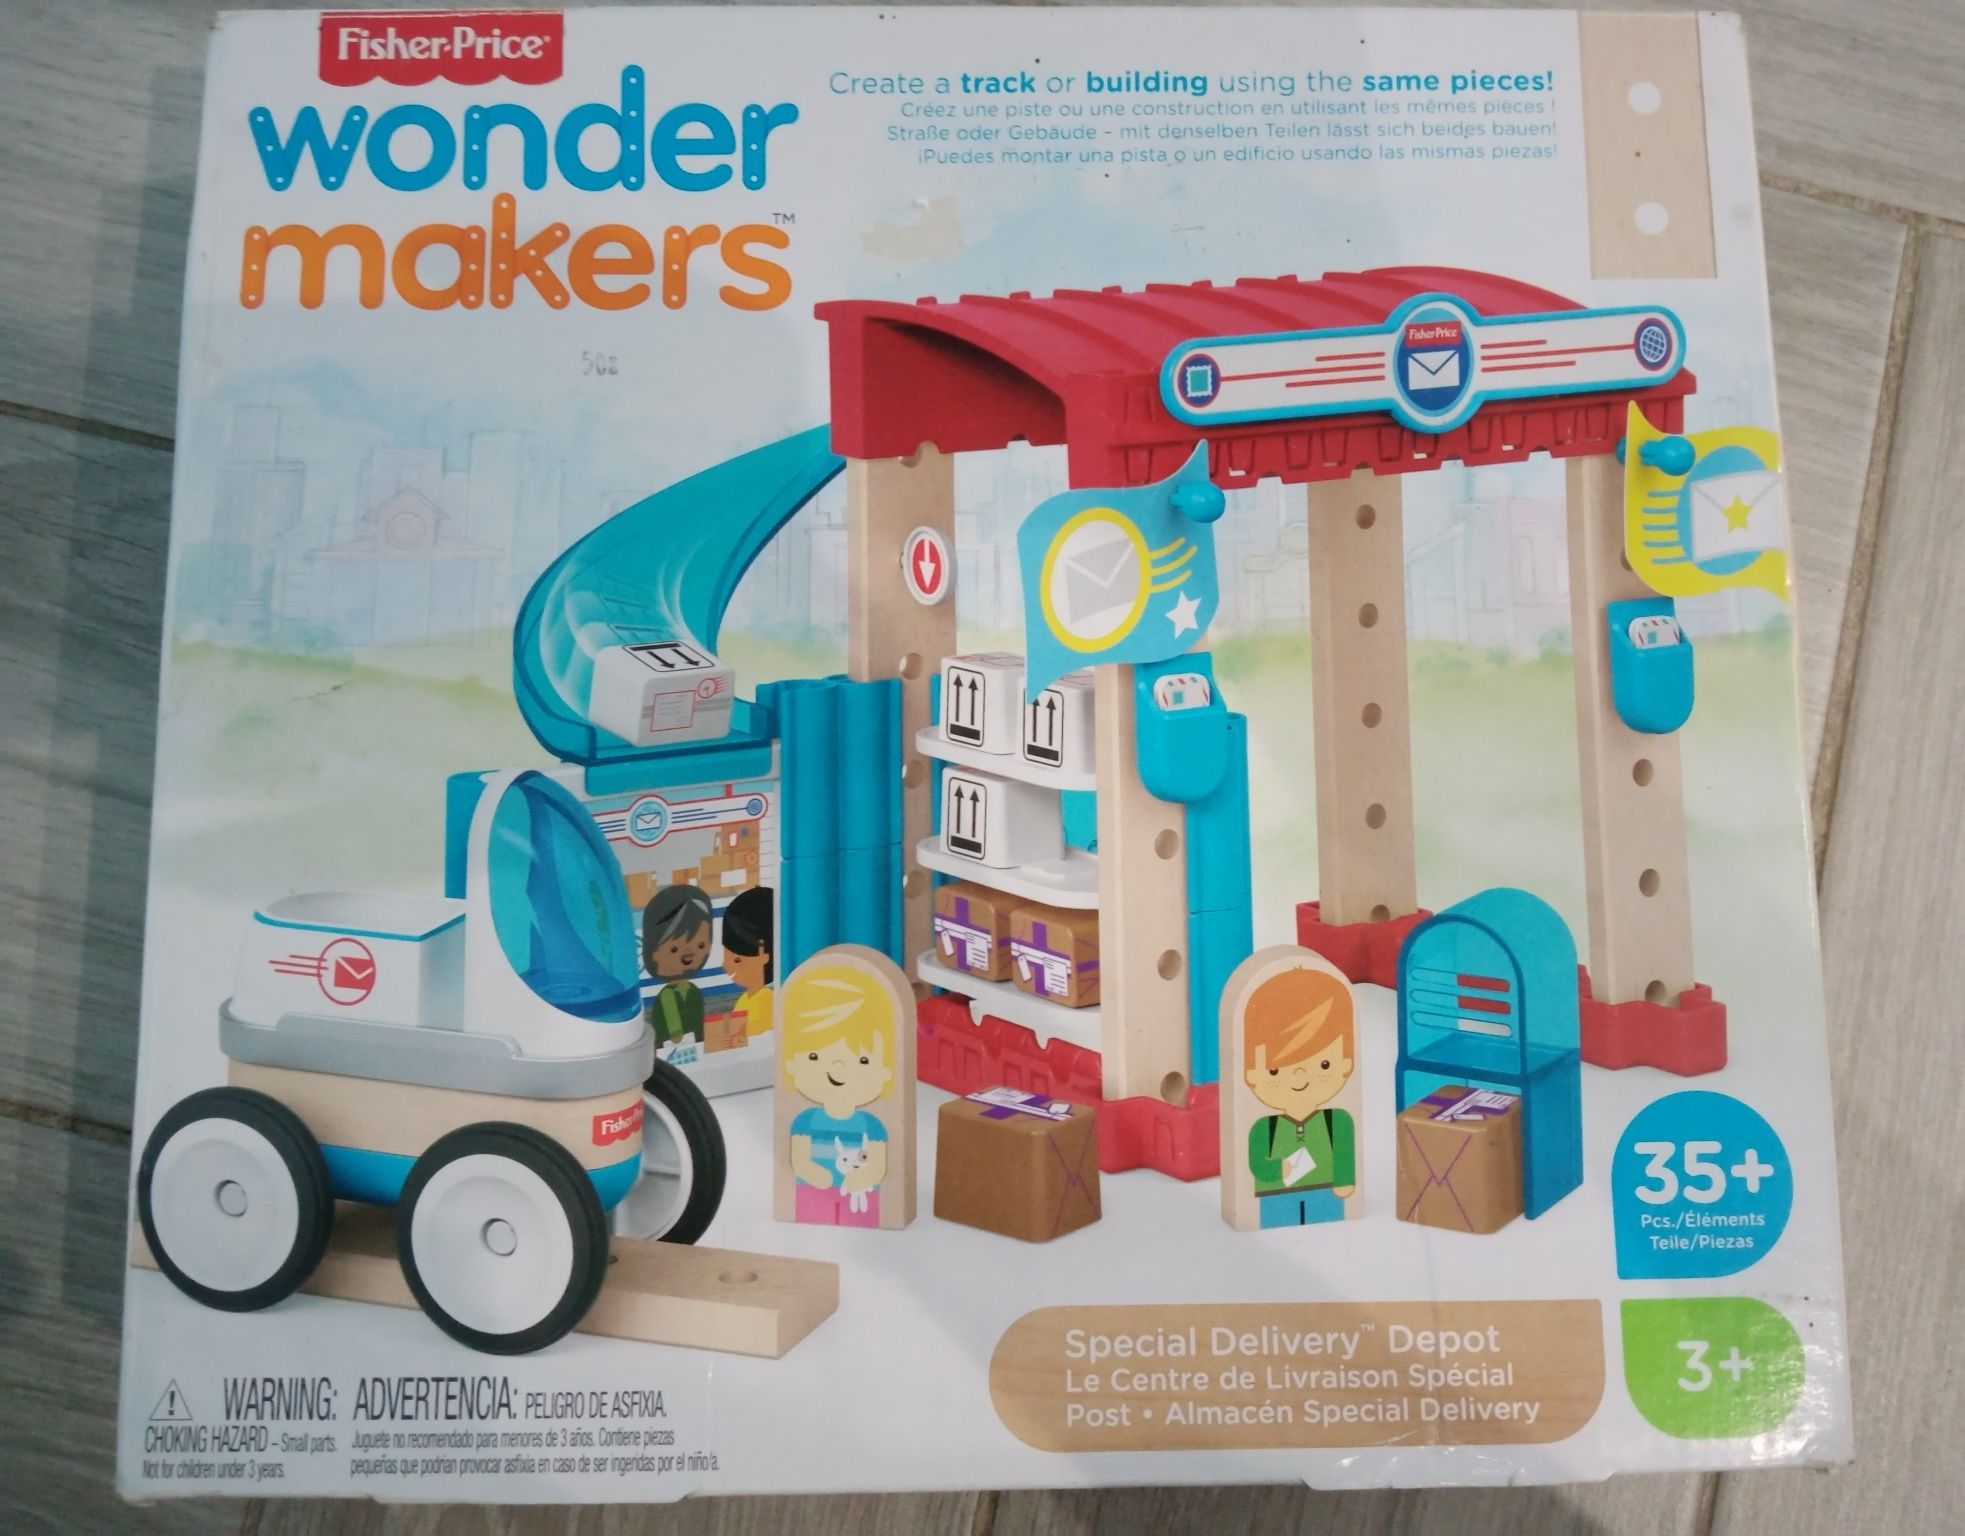 Fisher-Price Wonder makers Magazyn dostaw